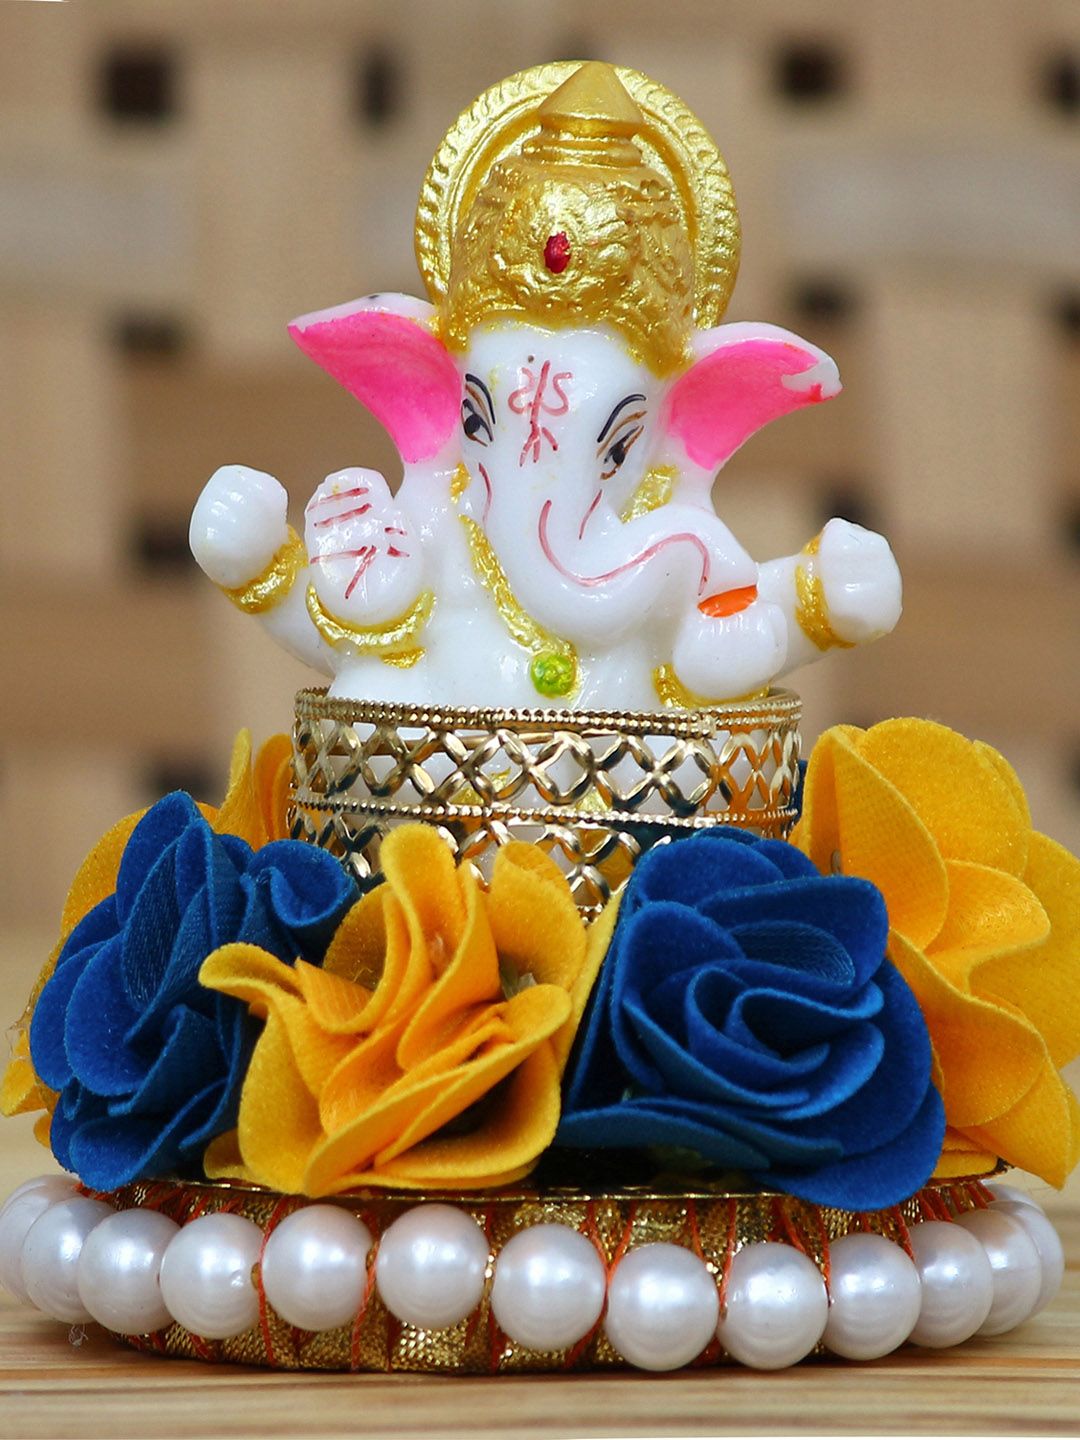 eCraftIndia White & Yellow Handcrafted Lord Ganesha Idol on Decorated Plate Price in India